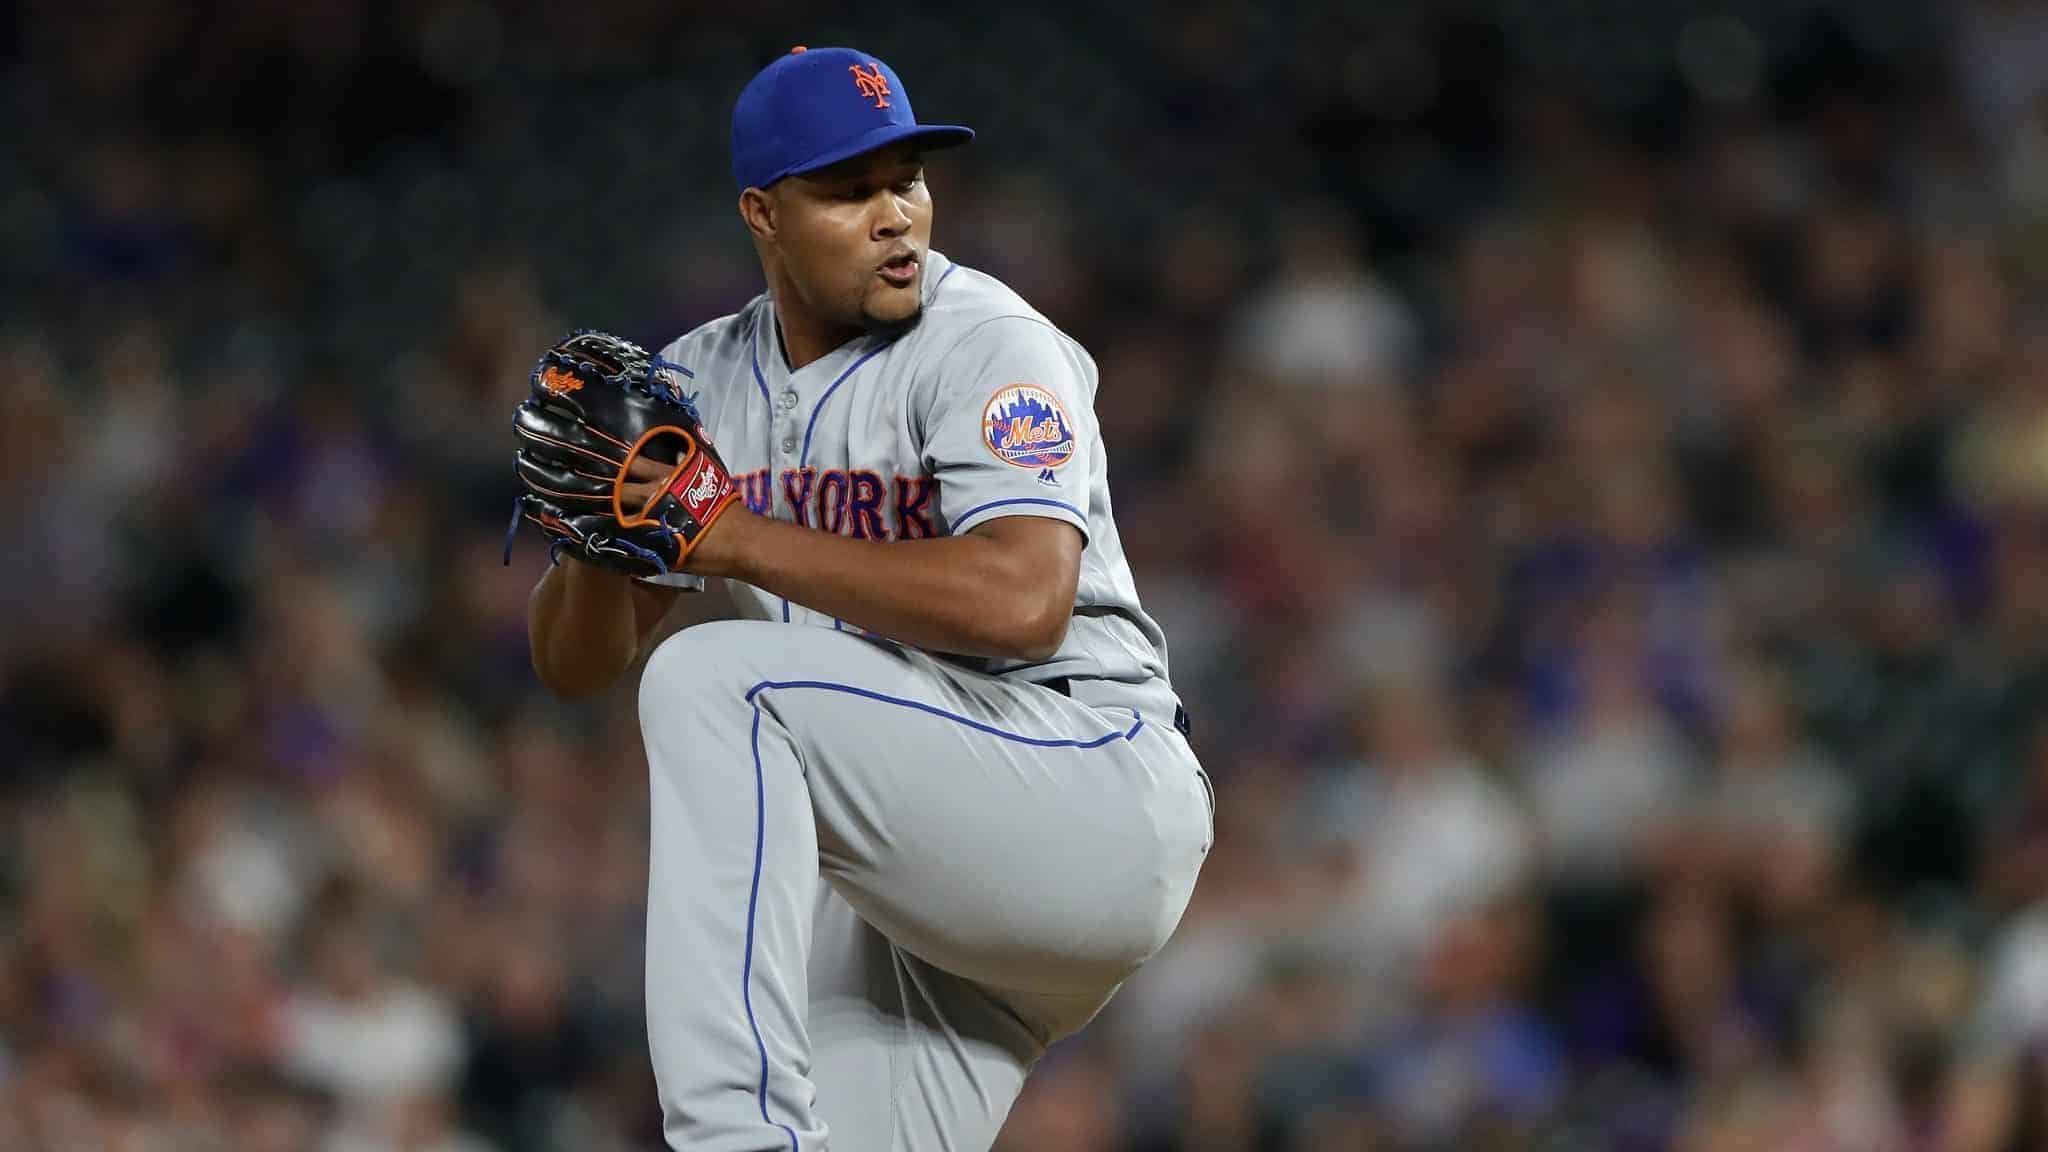 DENVER, COLORADO - SEPTEMBER 16: Pitcher Jeurys Familia #27 of the New York Mets throws in the sixth inning against the Colorado Rockies at Coors Field on September 16, 2019 in Denver, Colorado.